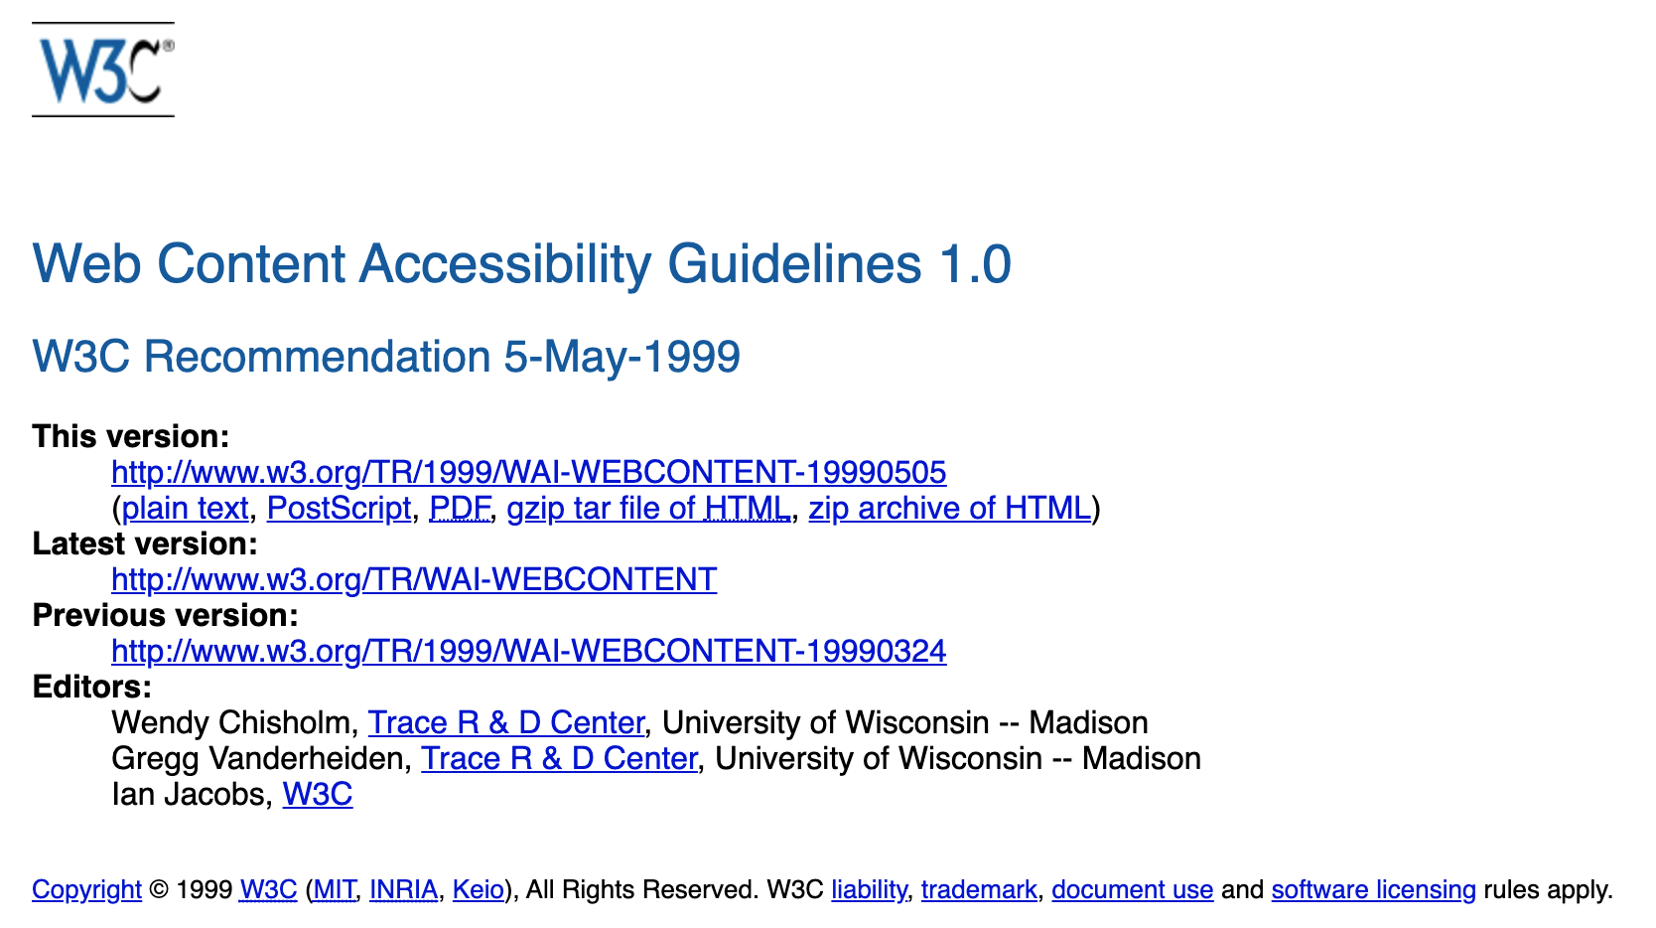 Web Content Accessibility Guidelines 1.0 front page